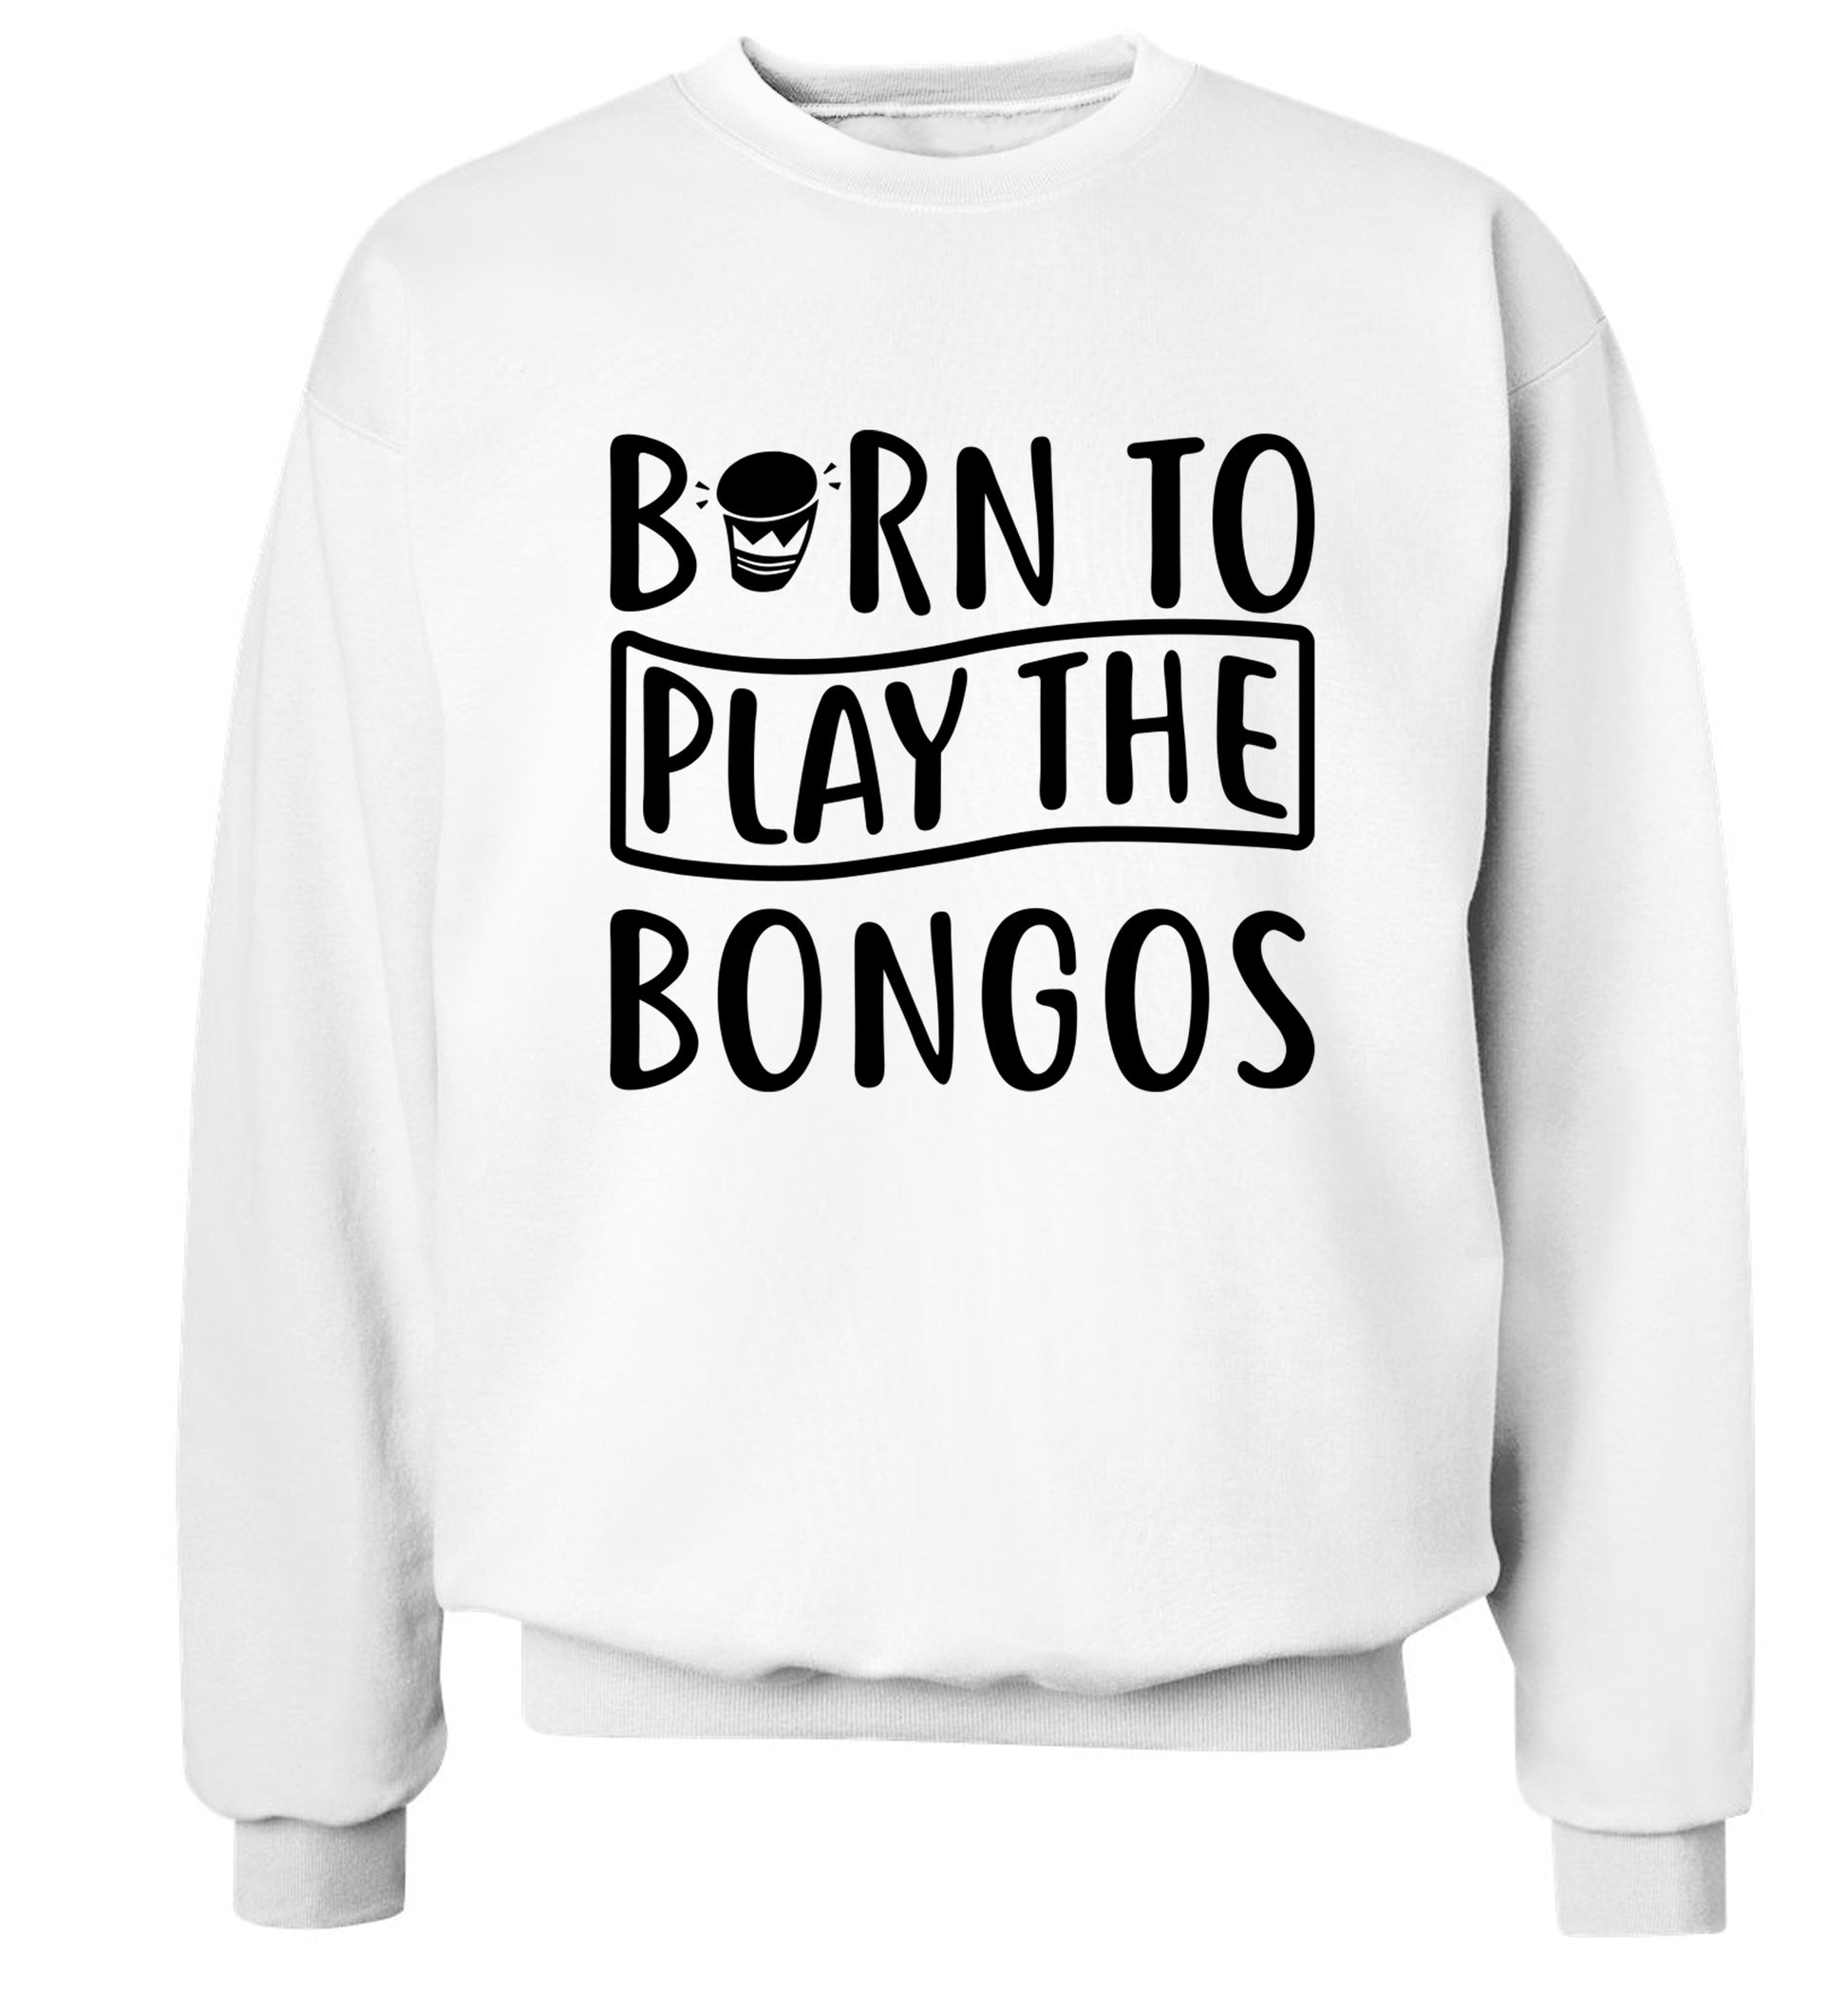 Born to play the bongos Adult's unisex white Sweater 2XL